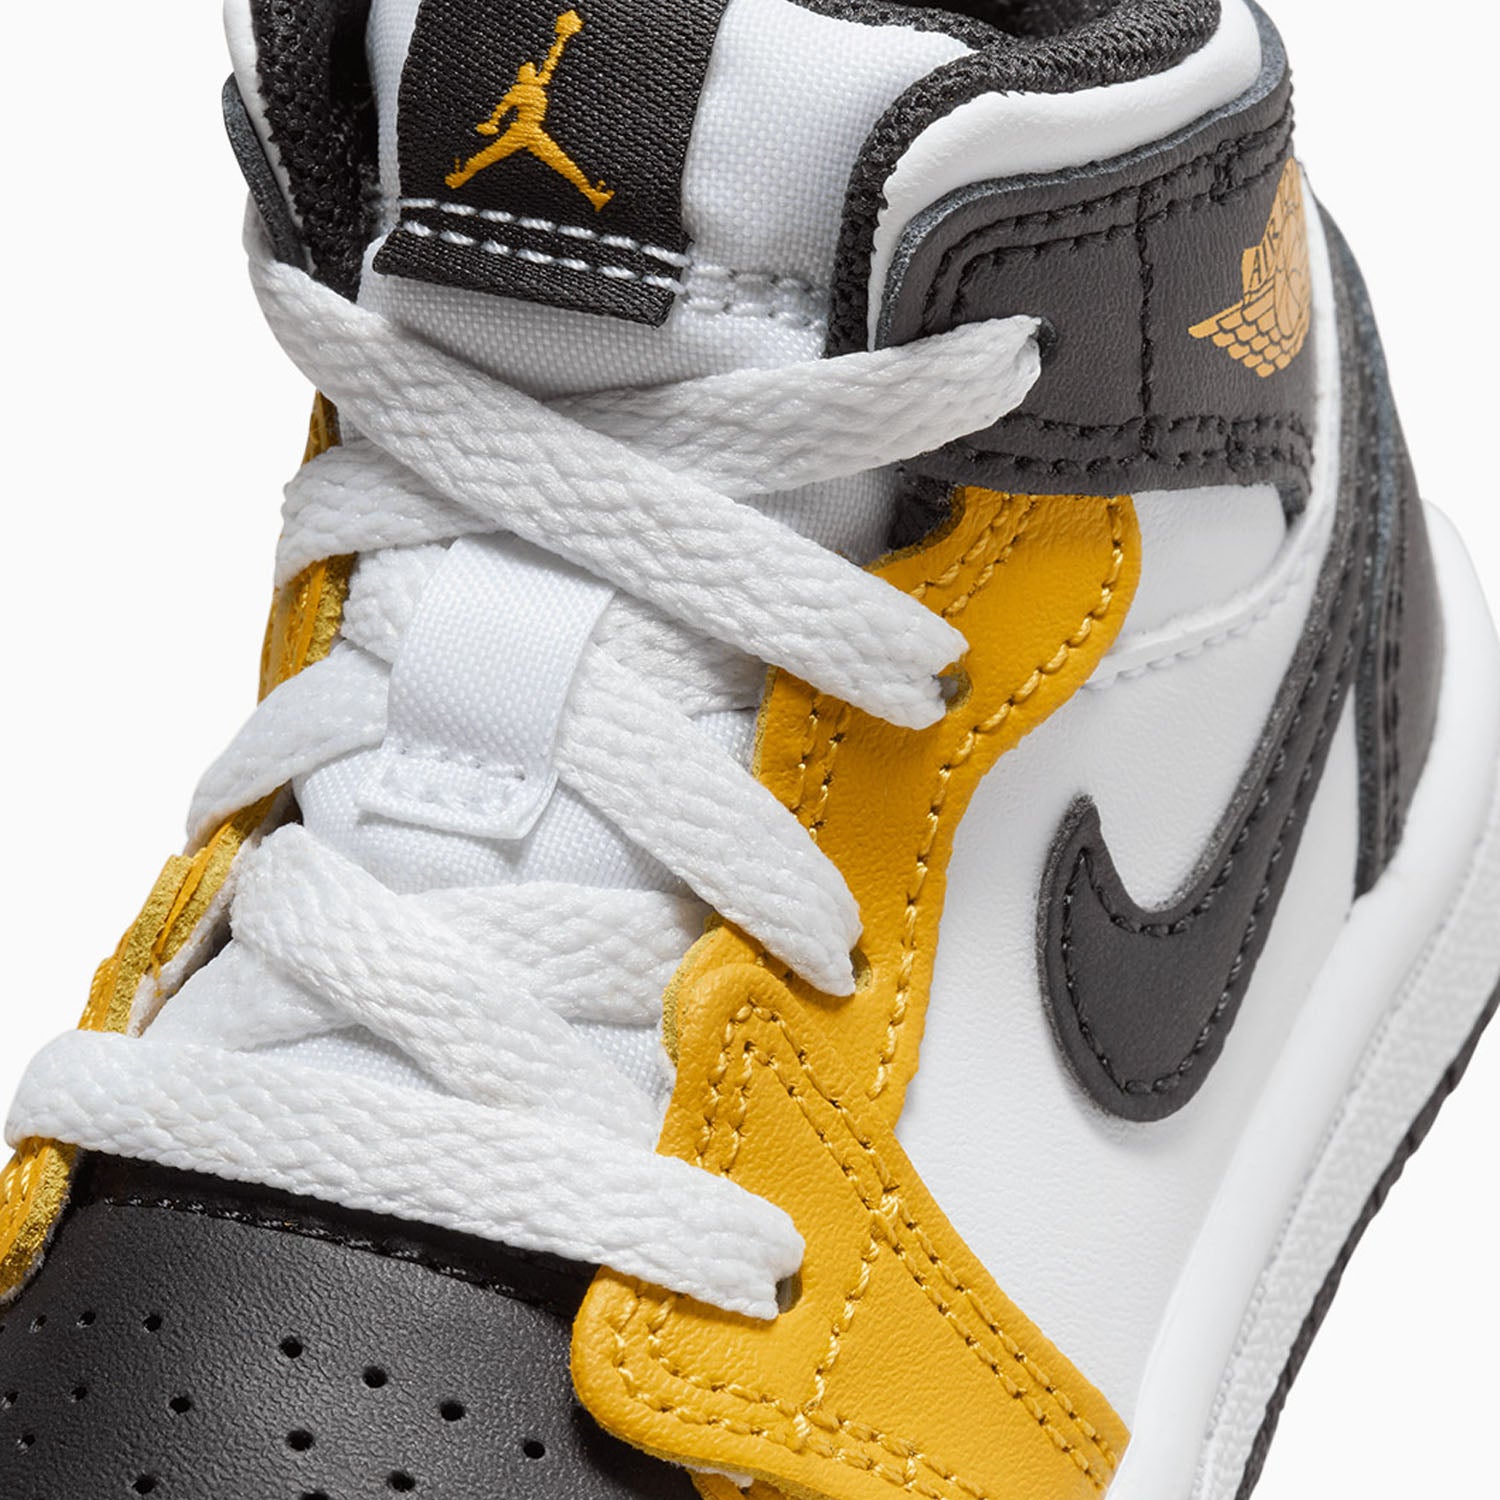 kids-air-jordan-1-mid-yellow-ochre-toddlers-shoes-dq8425-701